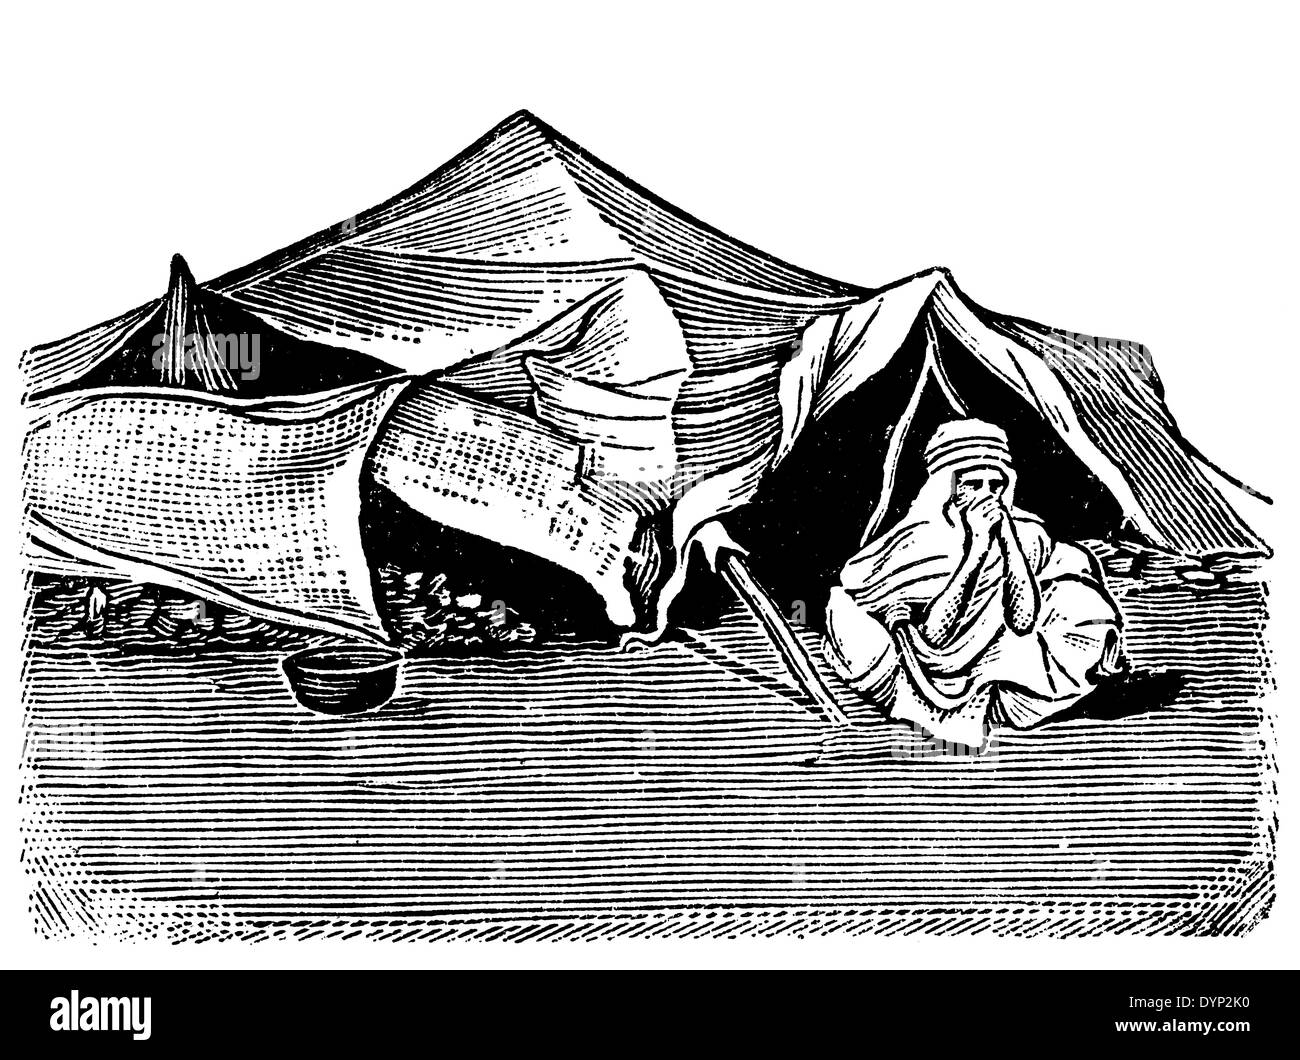 Bedouin tent, North Africa, traditional house, illustration from Soviet encyclopedia, 1926 Stock Photo